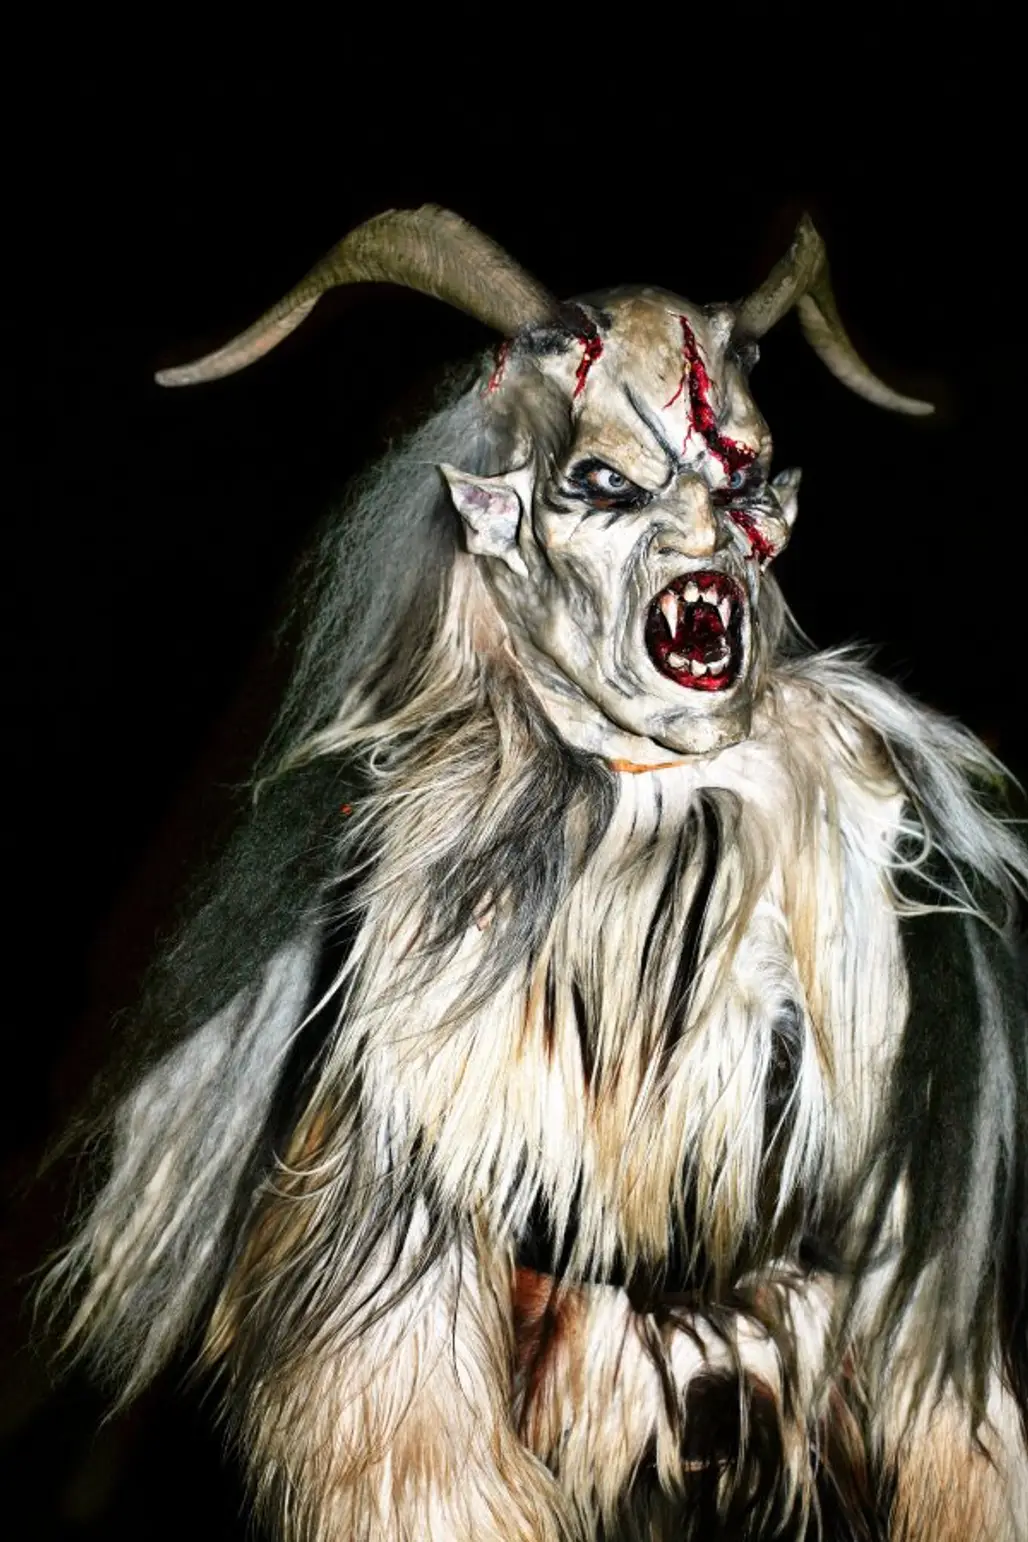 Austrian and Bavarian Children Look out for Horned Krampus